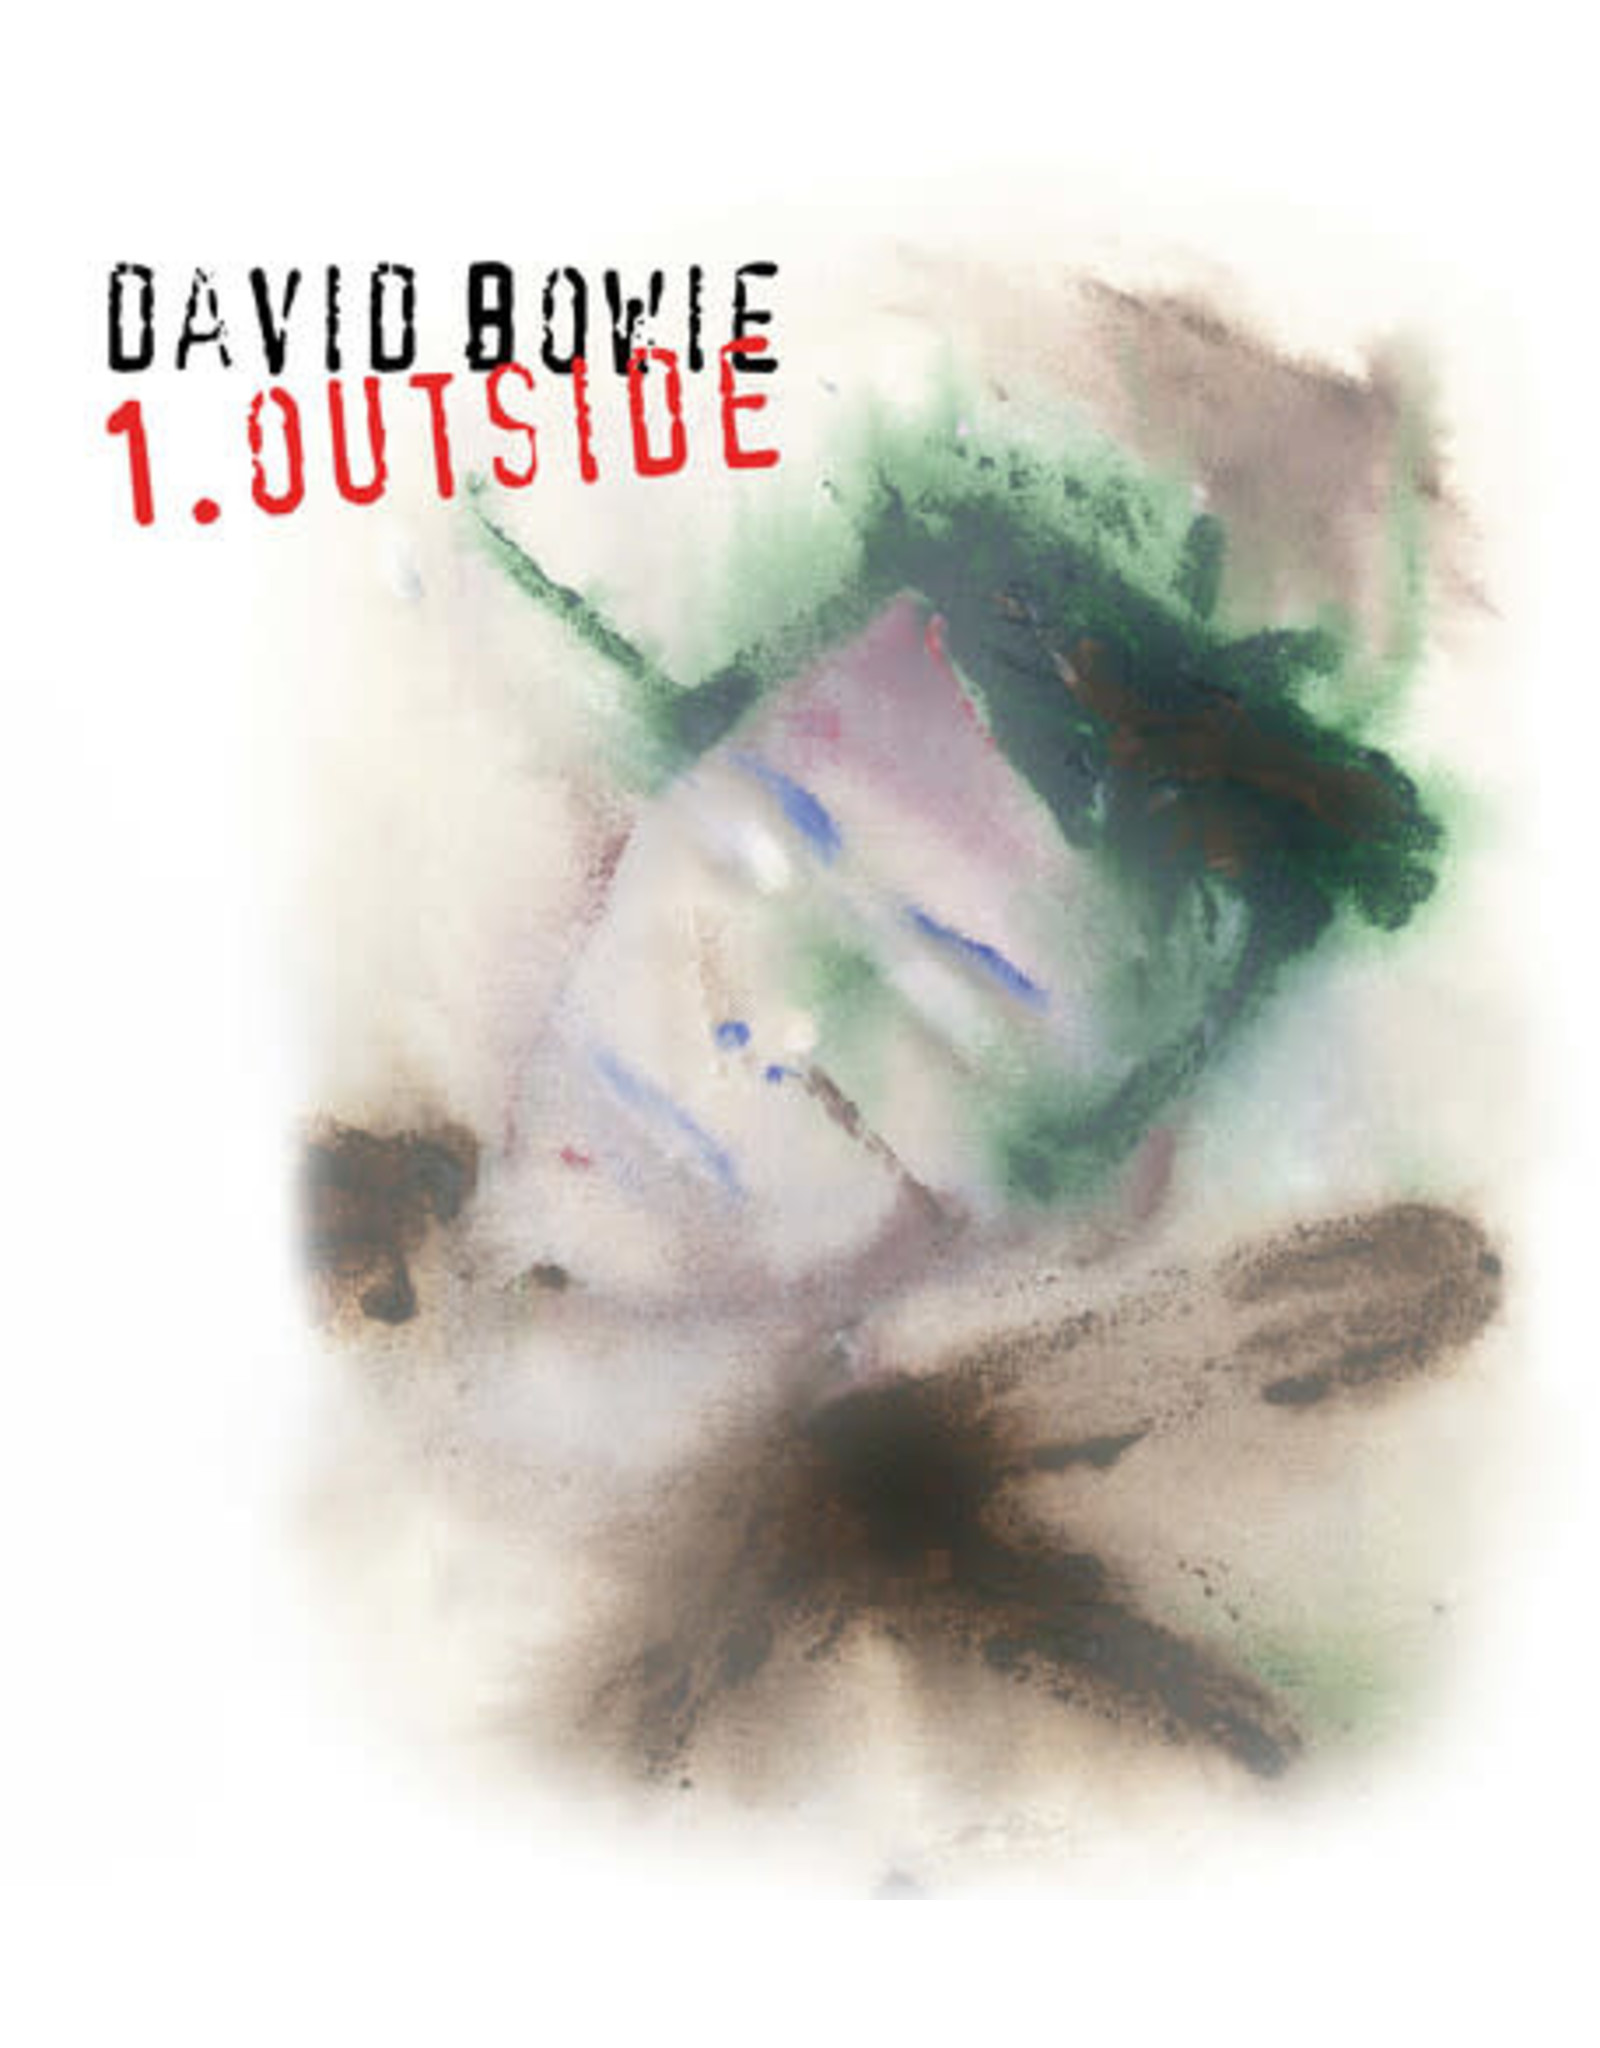 New Vinyl David Bowie - 1. Outside (The Nathan Adler Diaries: A Hyper Cycle, 2021 Remaster) 2LP